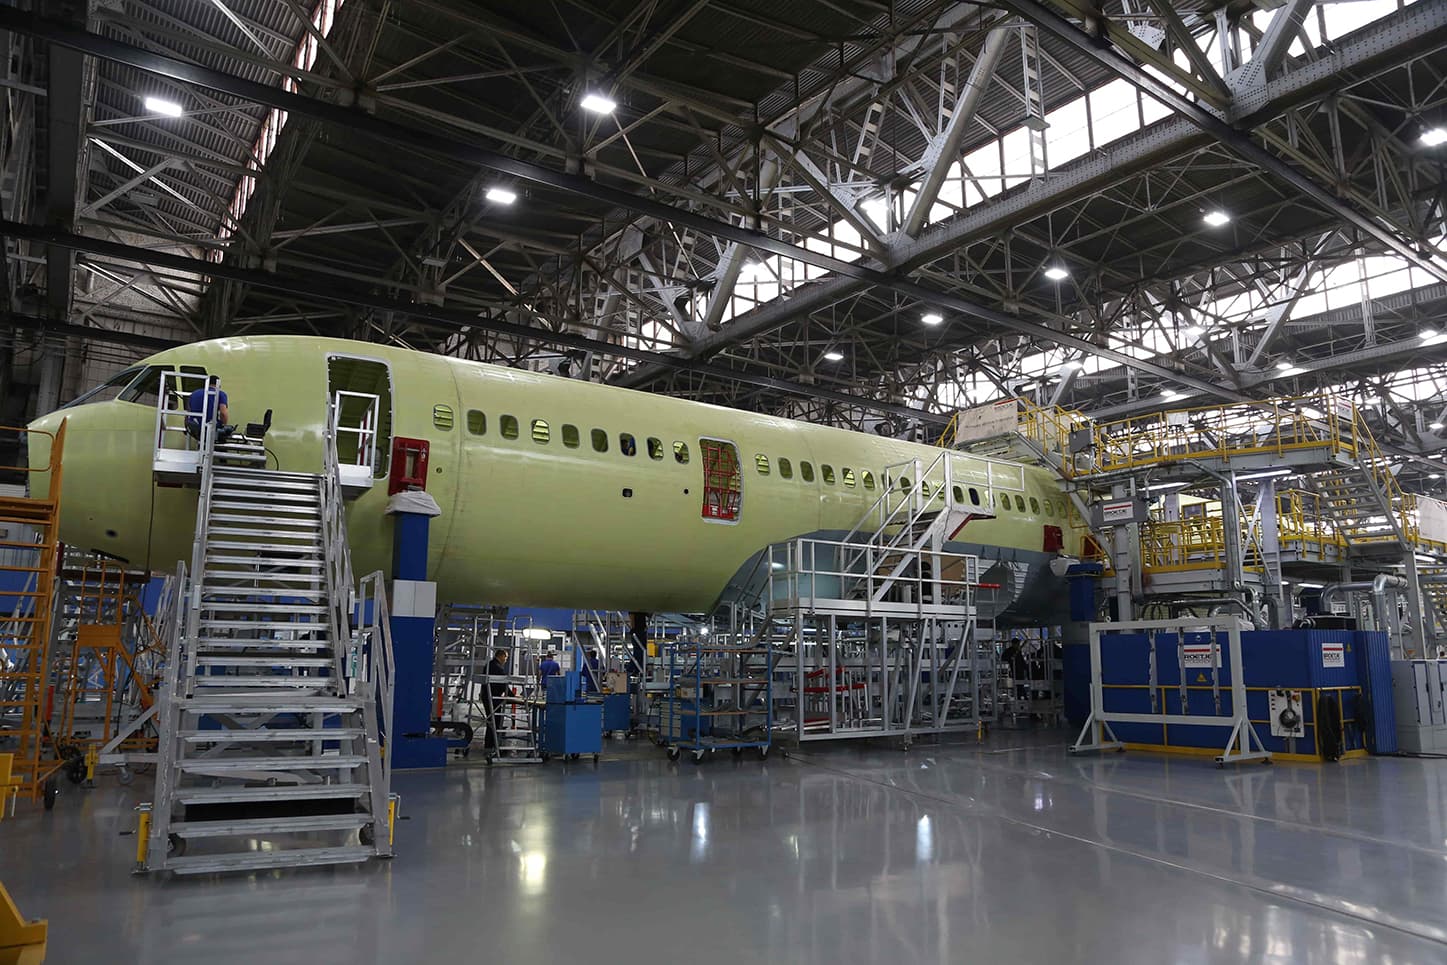 The assembly of the MC-21-300 fuselage to be tested with the Russian PD-14 engine was completed